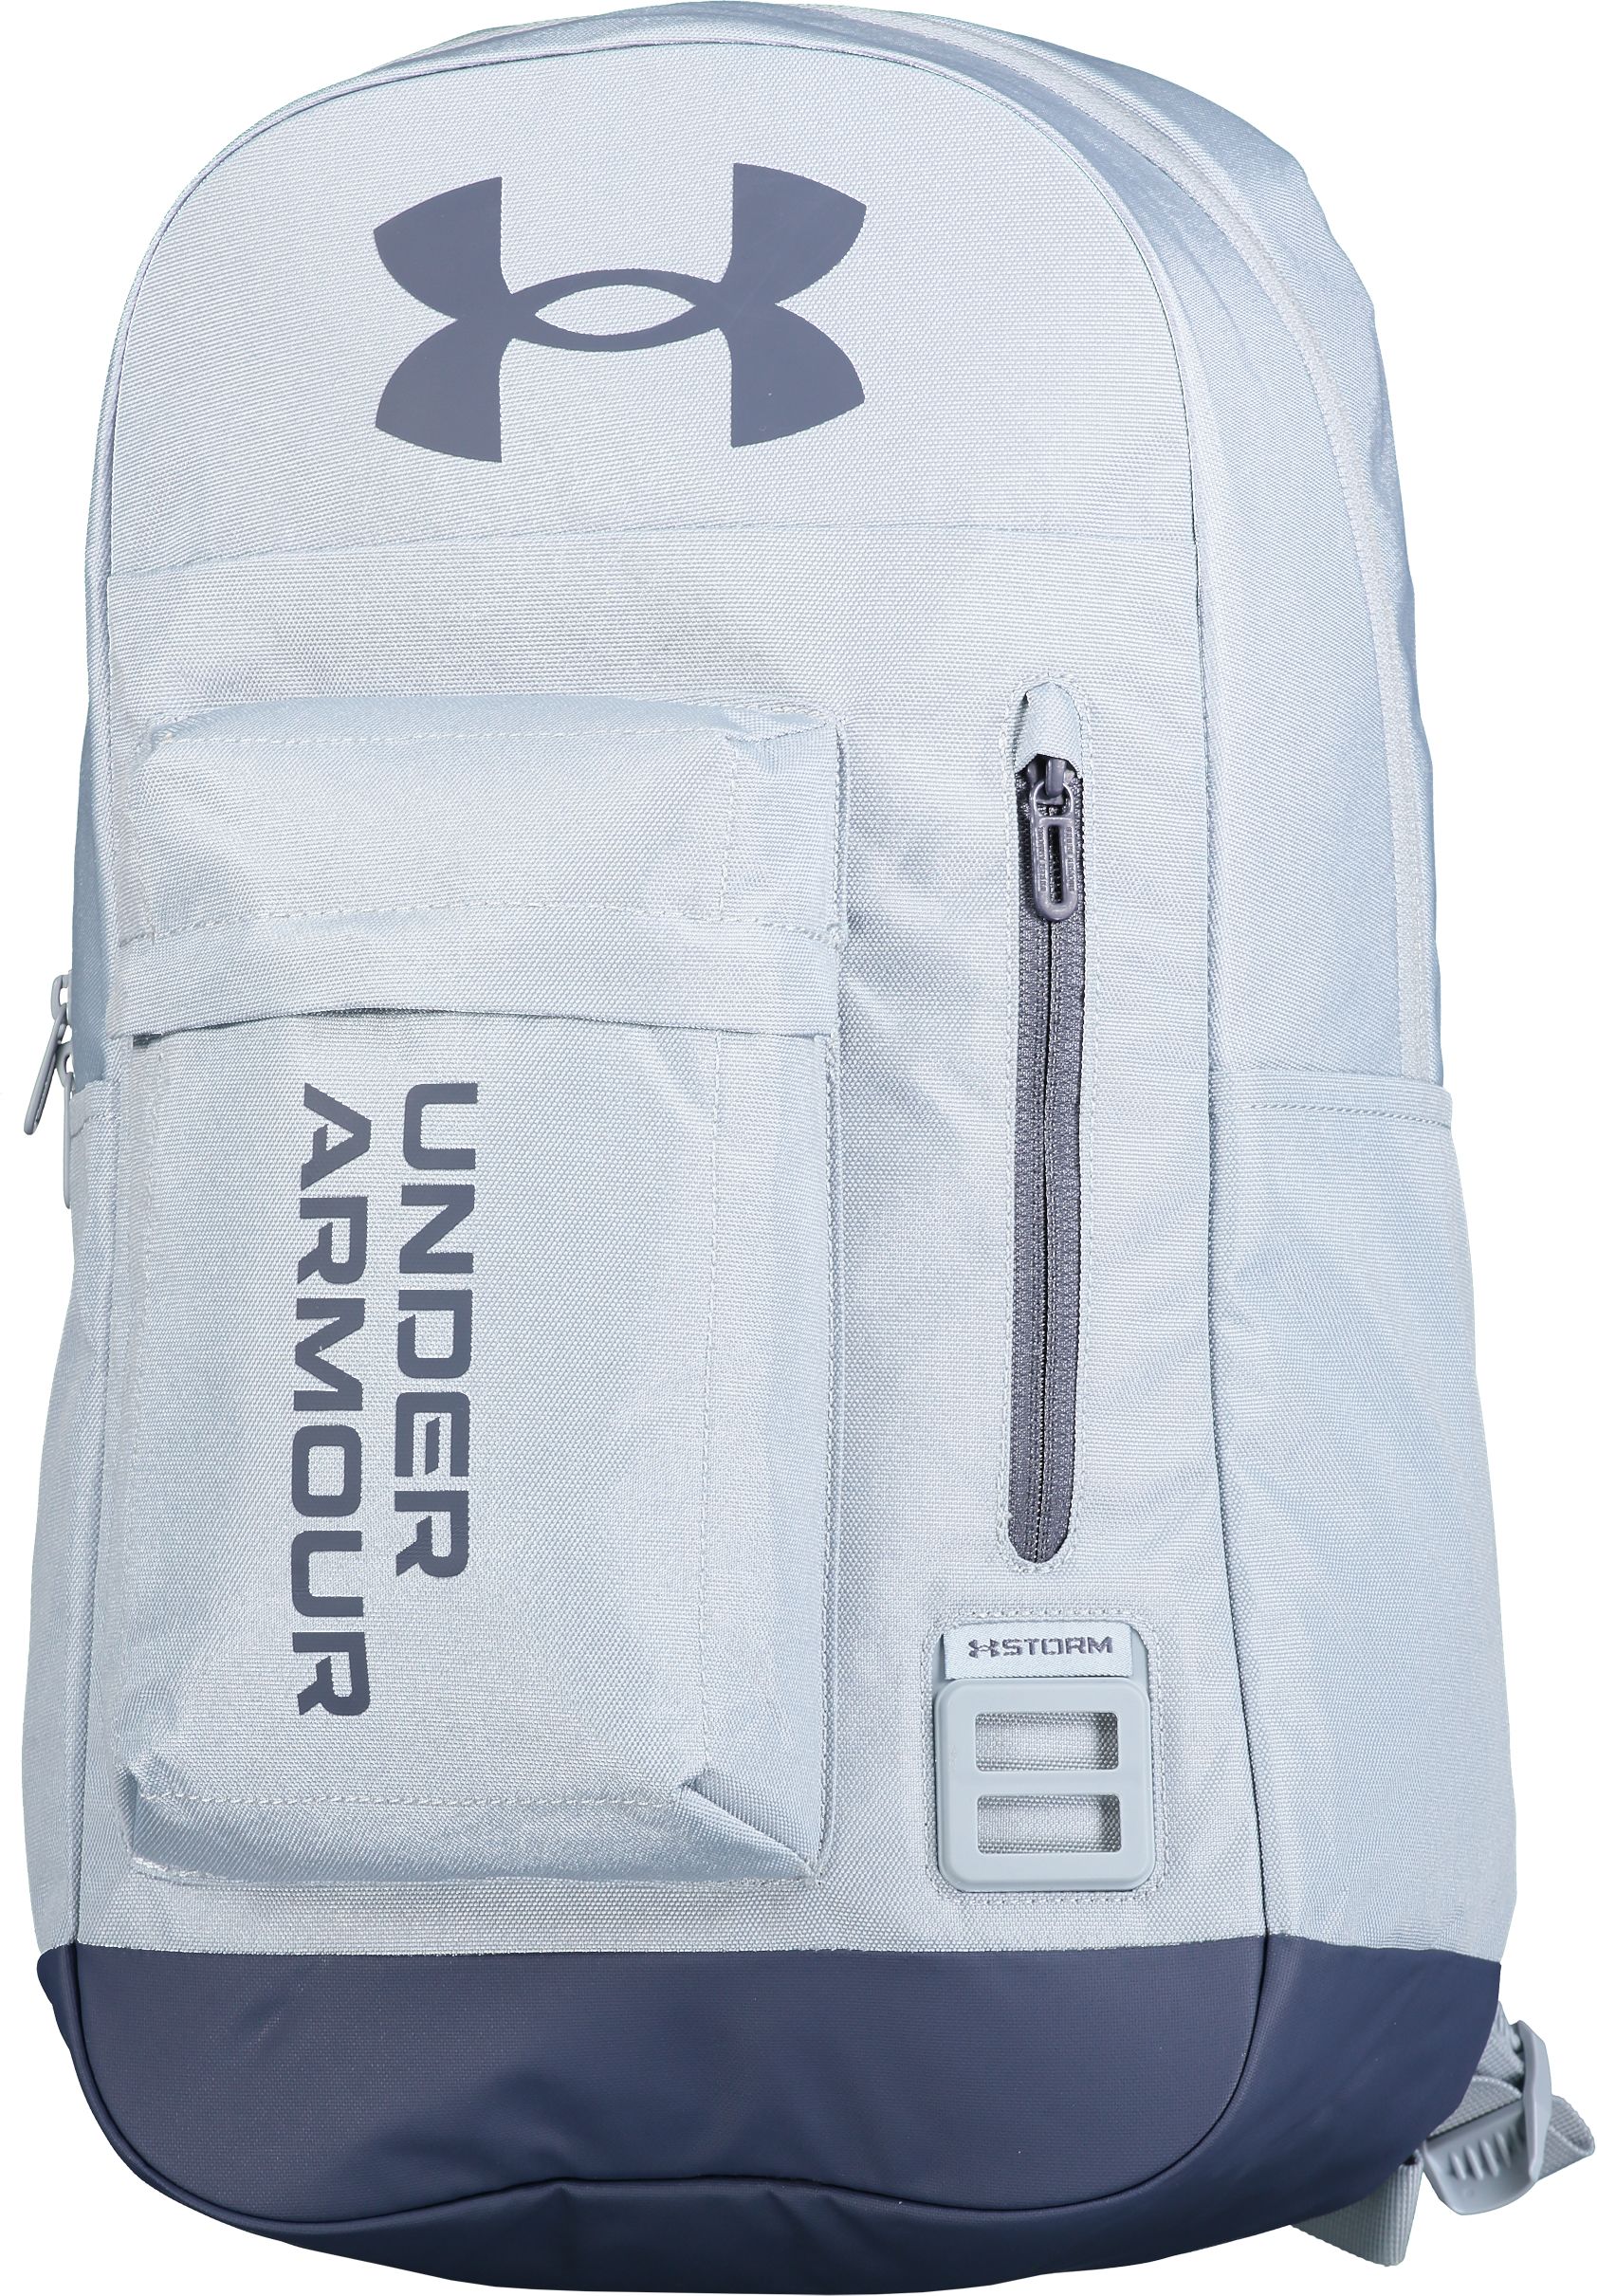 UNDER ARMOUR, HALFTIME BACKPACK